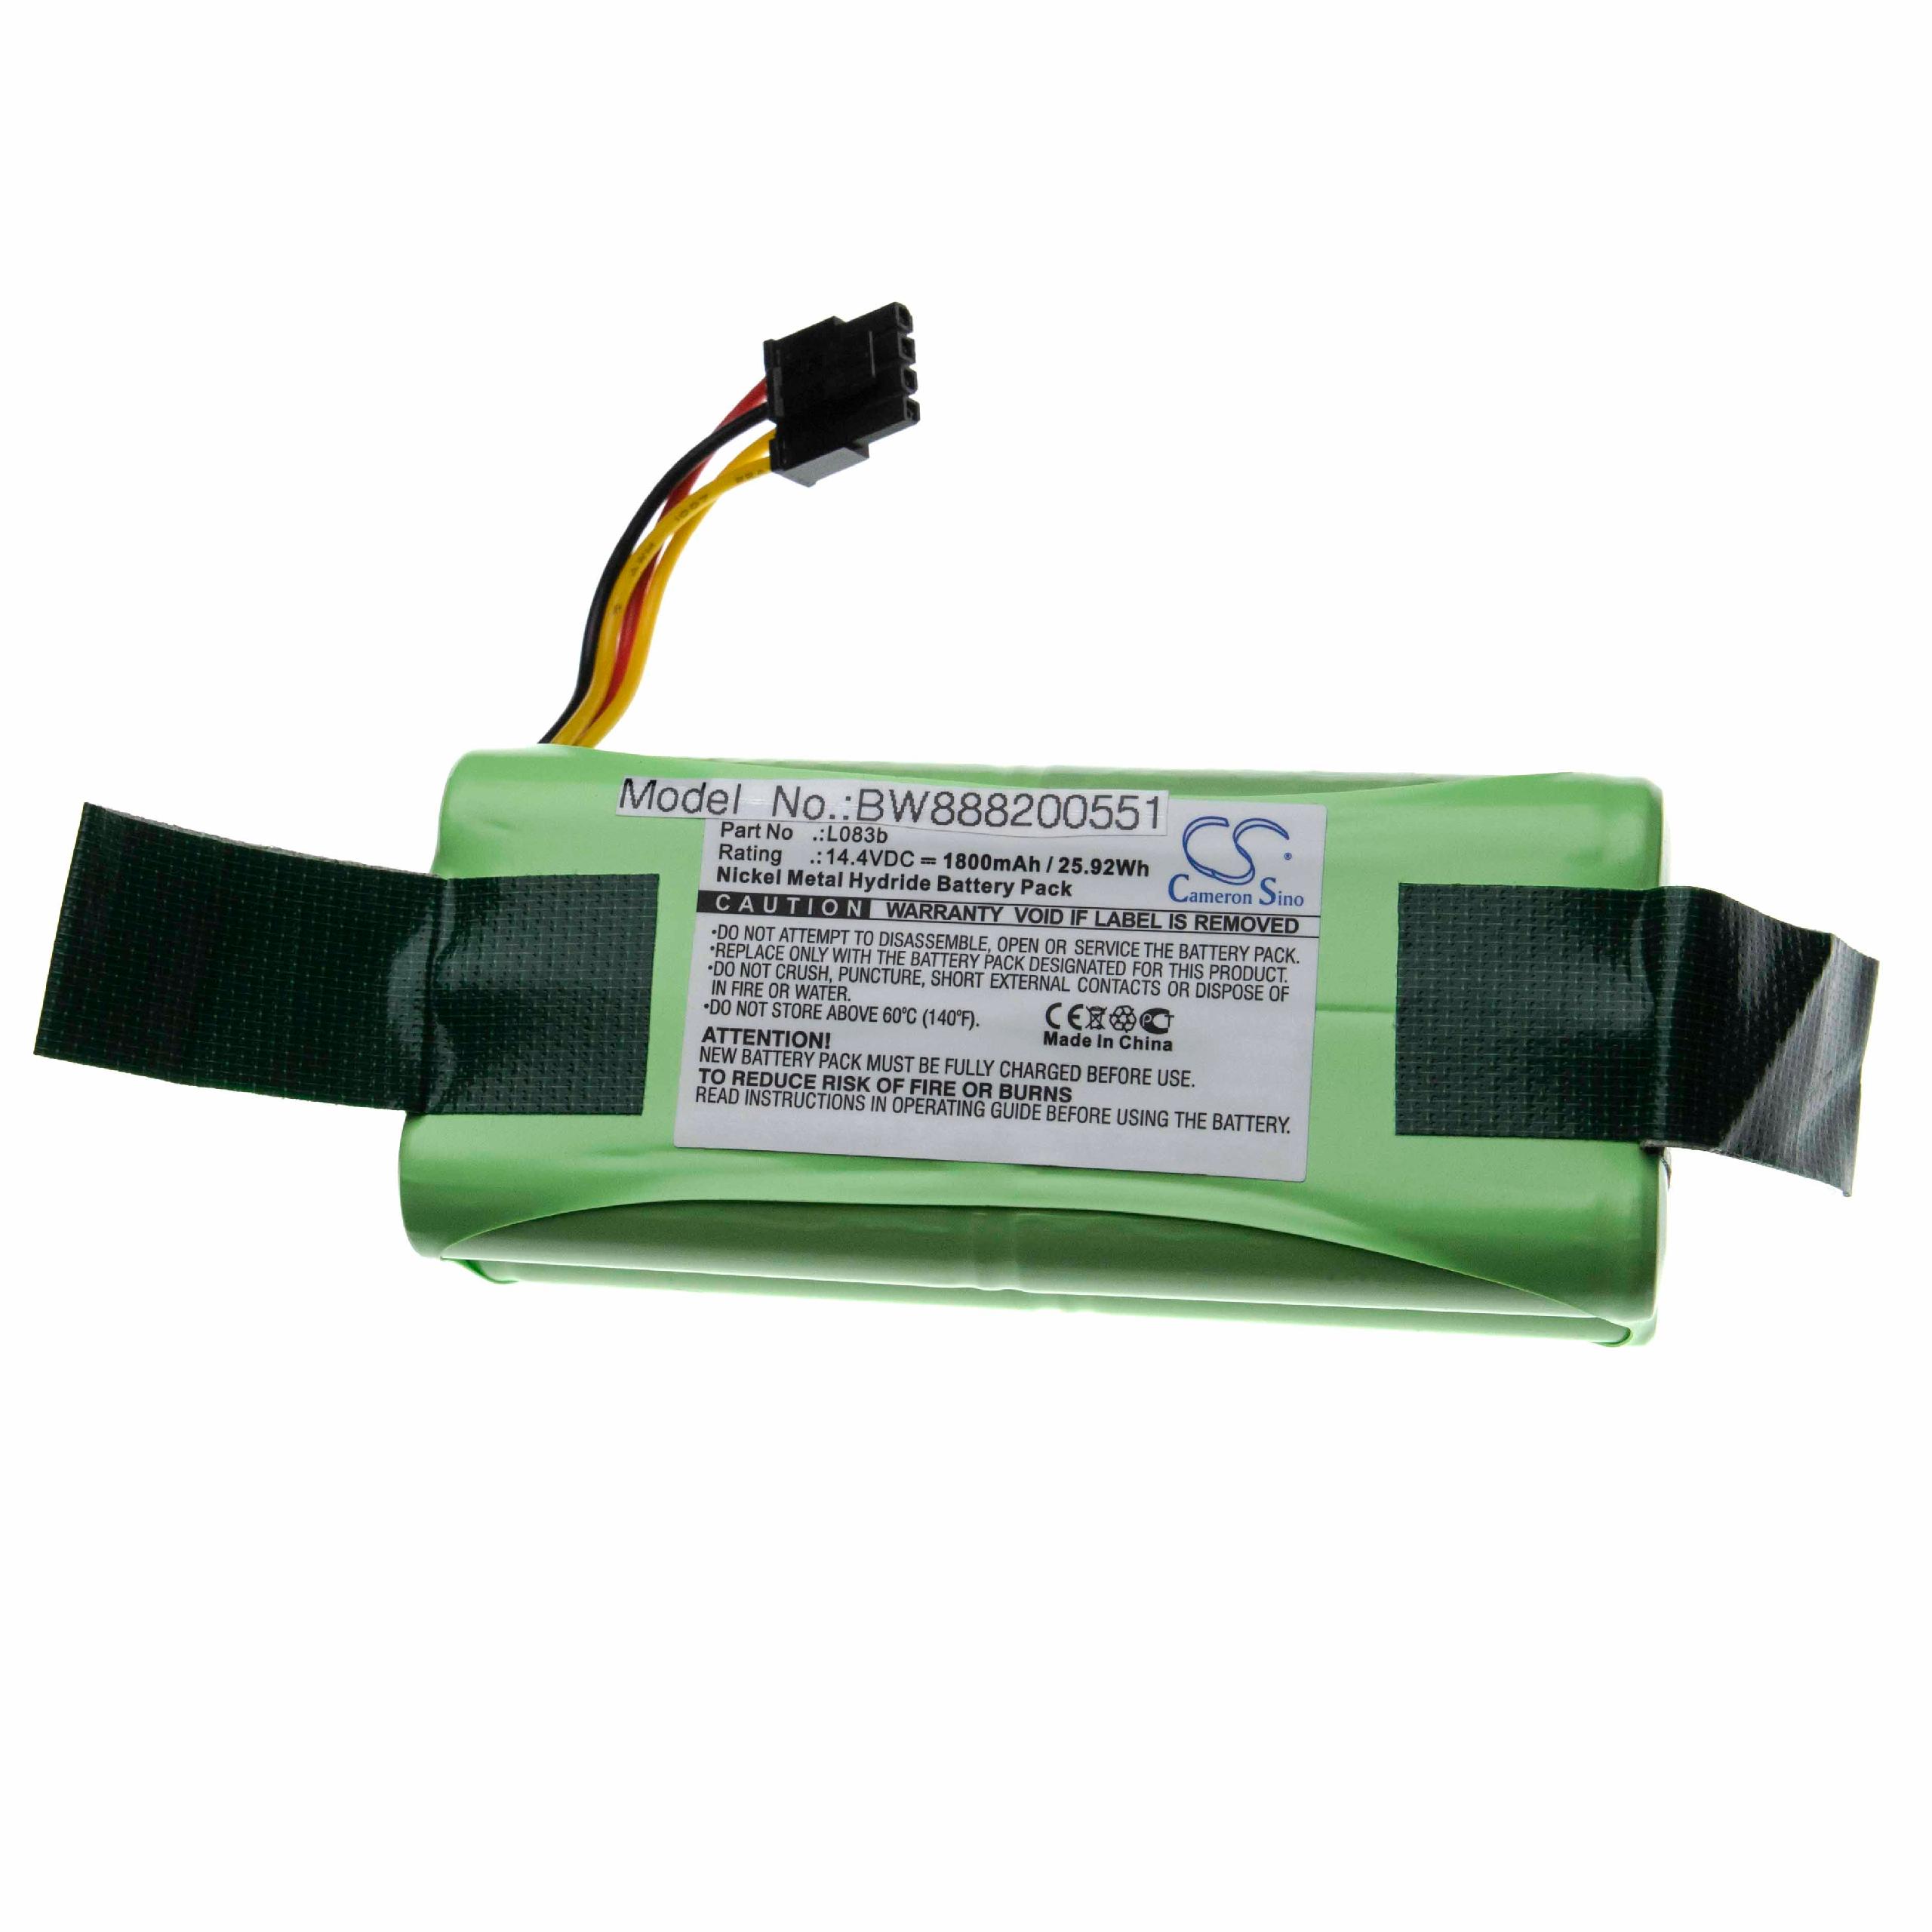 Battery Replacement for Midea L083b for - 1800mAh, 14.4V, NiMH